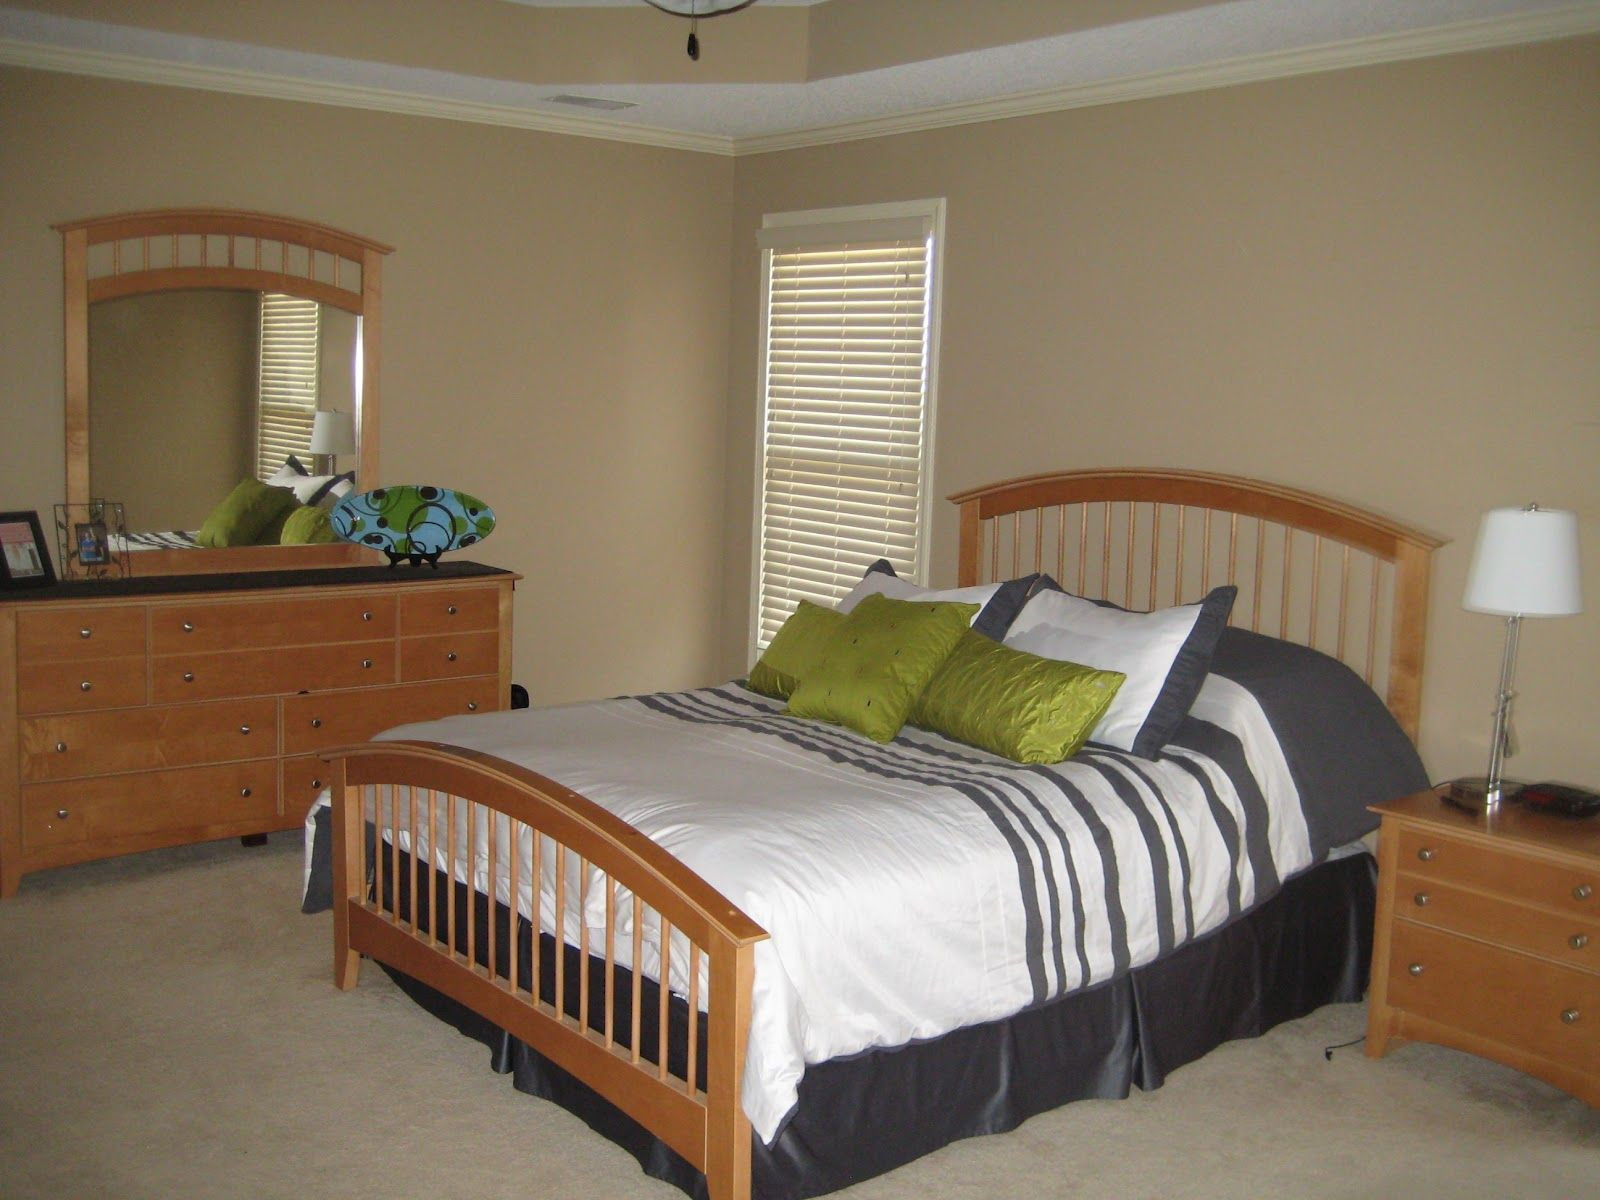 Small Bedroom Furniture Placement
 Simple Bedroom Arrangement Ideas Go to